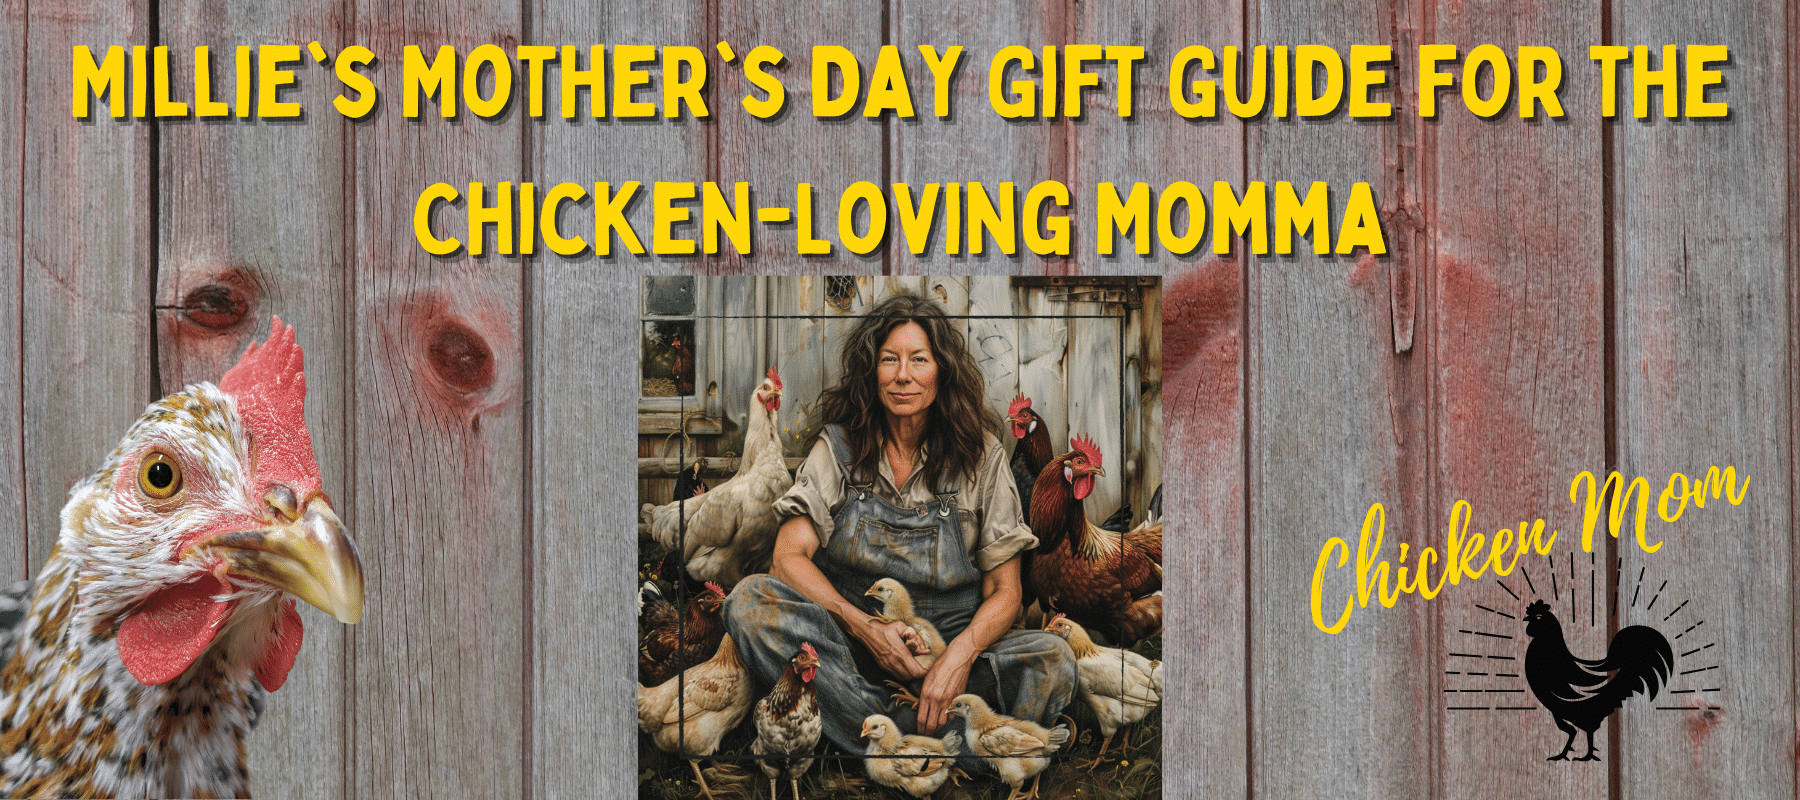 Millie's Mother's Day Gift Guide for the Chicken-Loving Momma